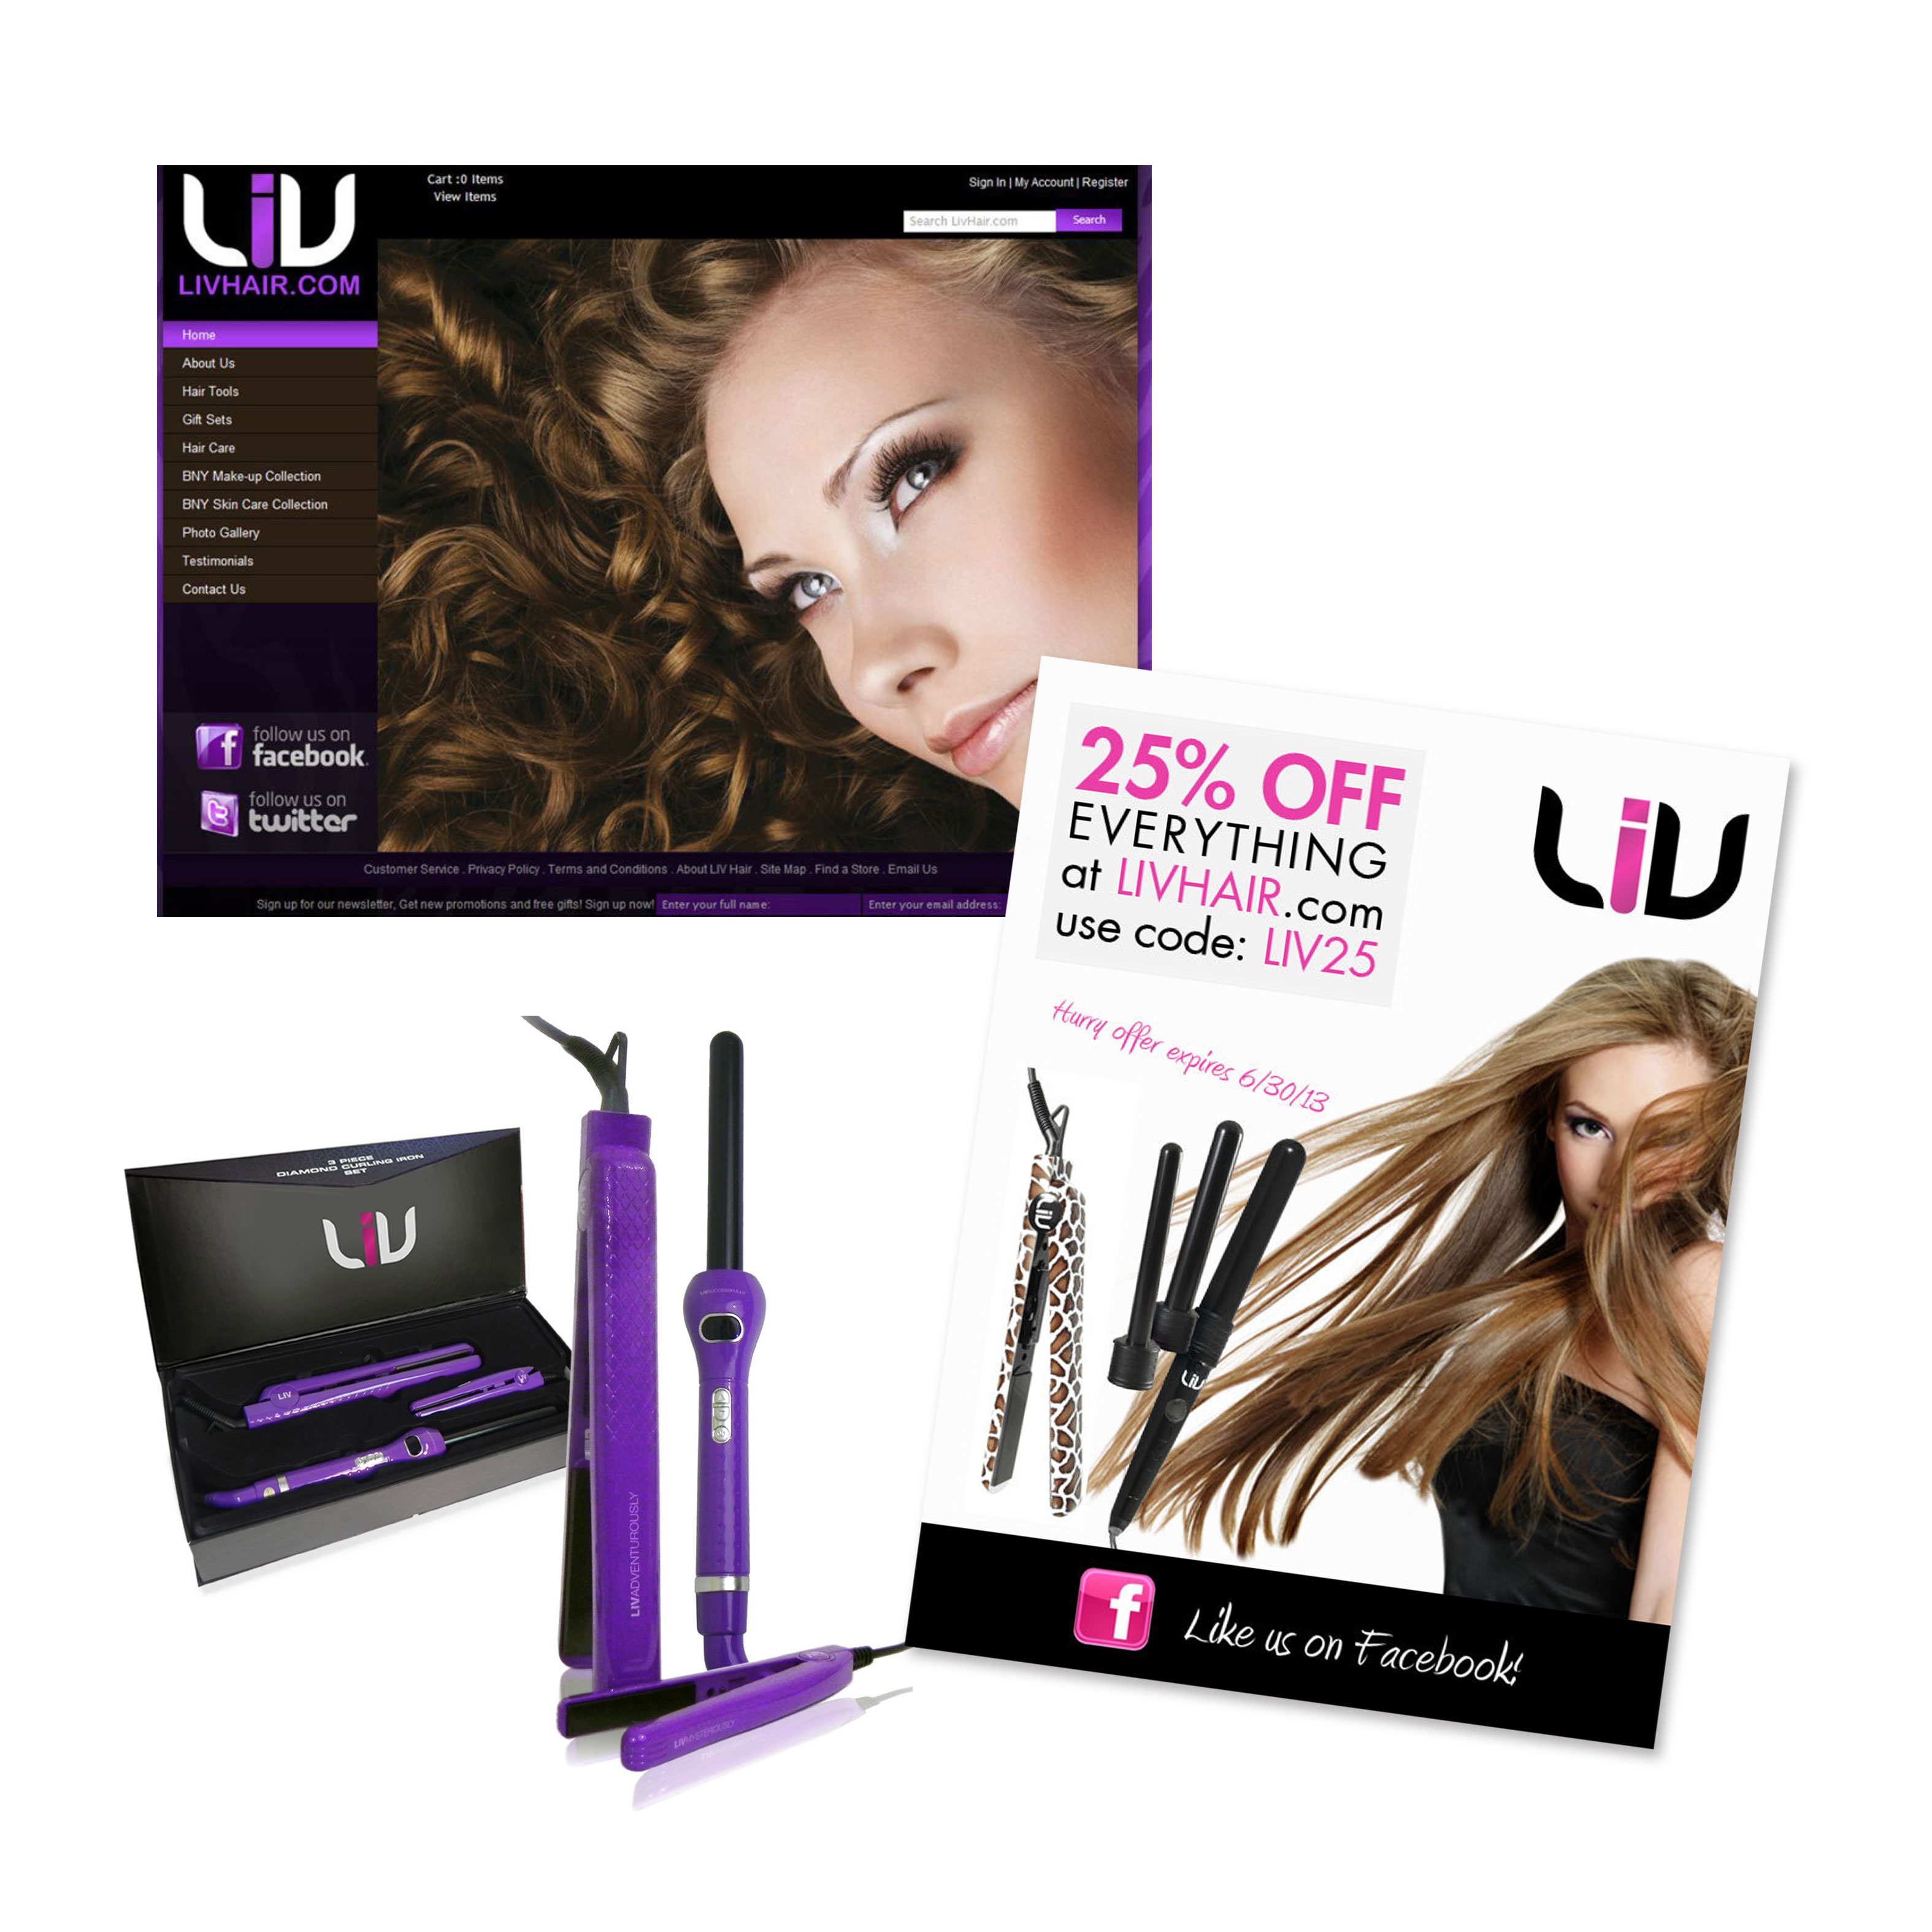 Brand and product design for Liv Hair. Picture shows website design example, email design example, product design and product packaging design.